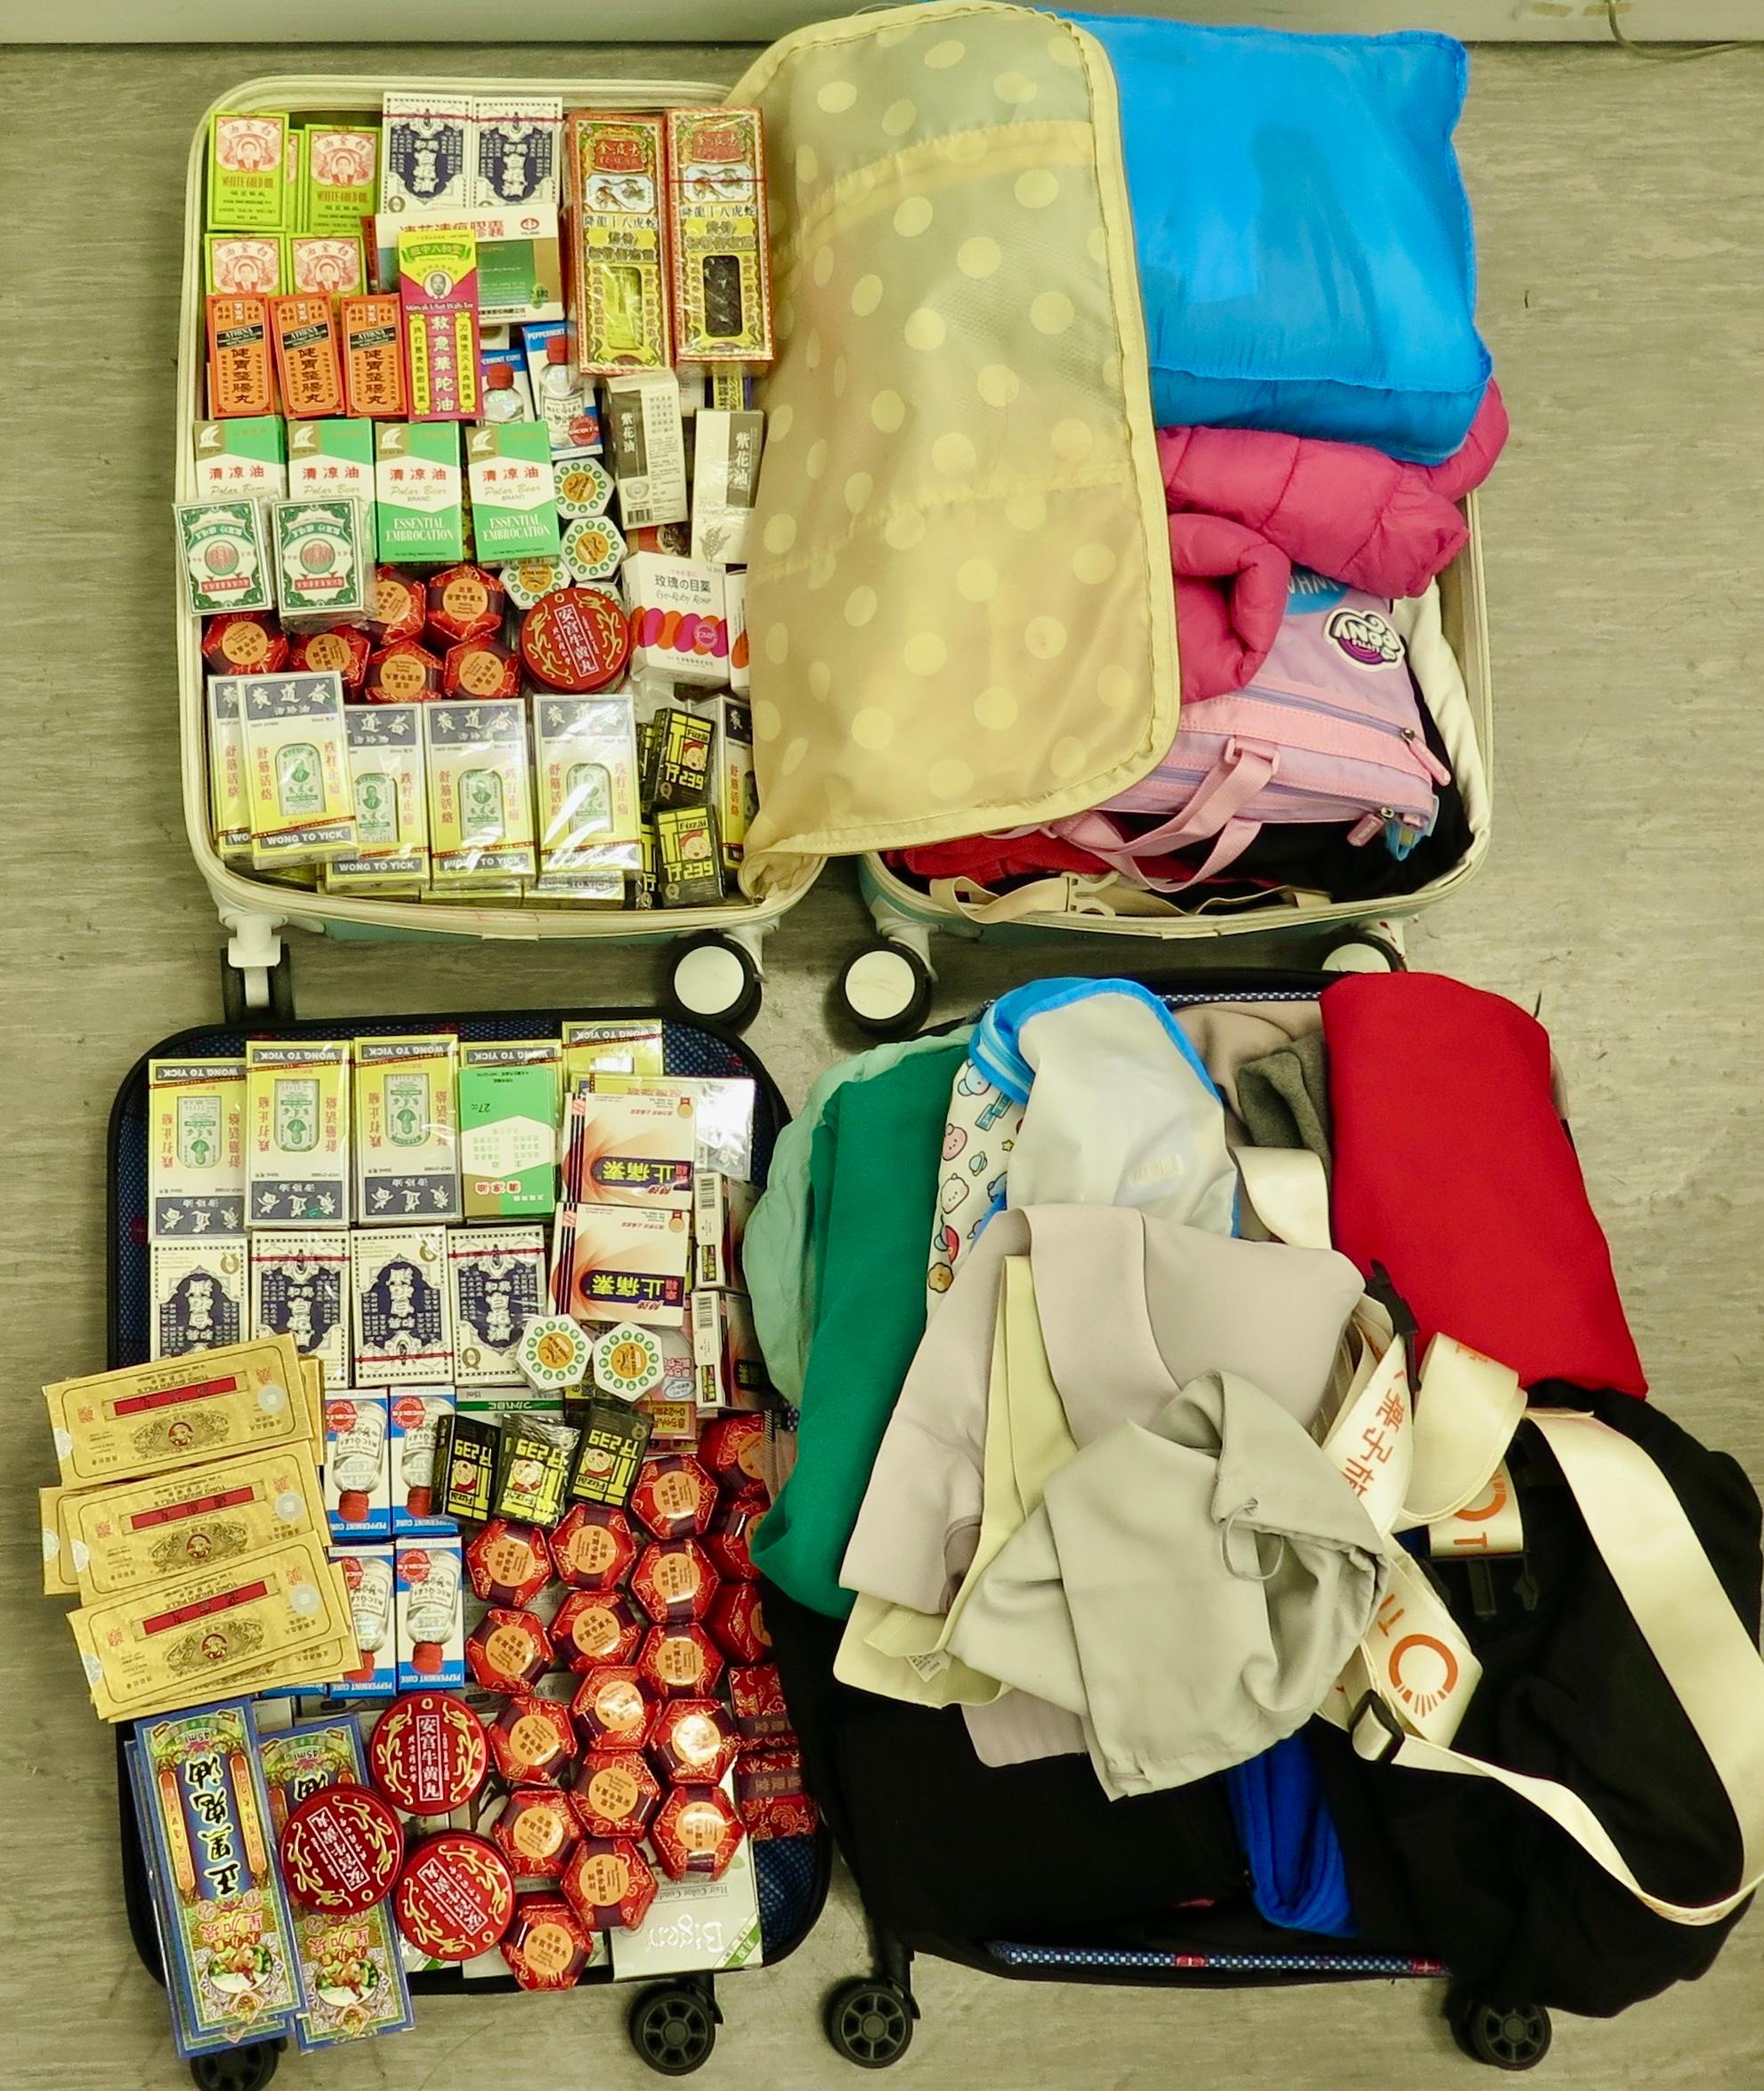 Hong Kong Customs detected four suspected medicine smuggling cases at Hong Kong International Airport on January 9 and yesterday (January 11). More than 12 000 tablets, about 4 388 milliliters and about 186 grams of suspected controlled medicines, with a total estimated market value of about $540,000, were seized. Photo shows the suspected controlled medicines, including pain and fever relief medicines containing paracetamol, medicinal oils and eye drops, seized by Customs officers from the hand-carried baggage of an outgoing female passenger.